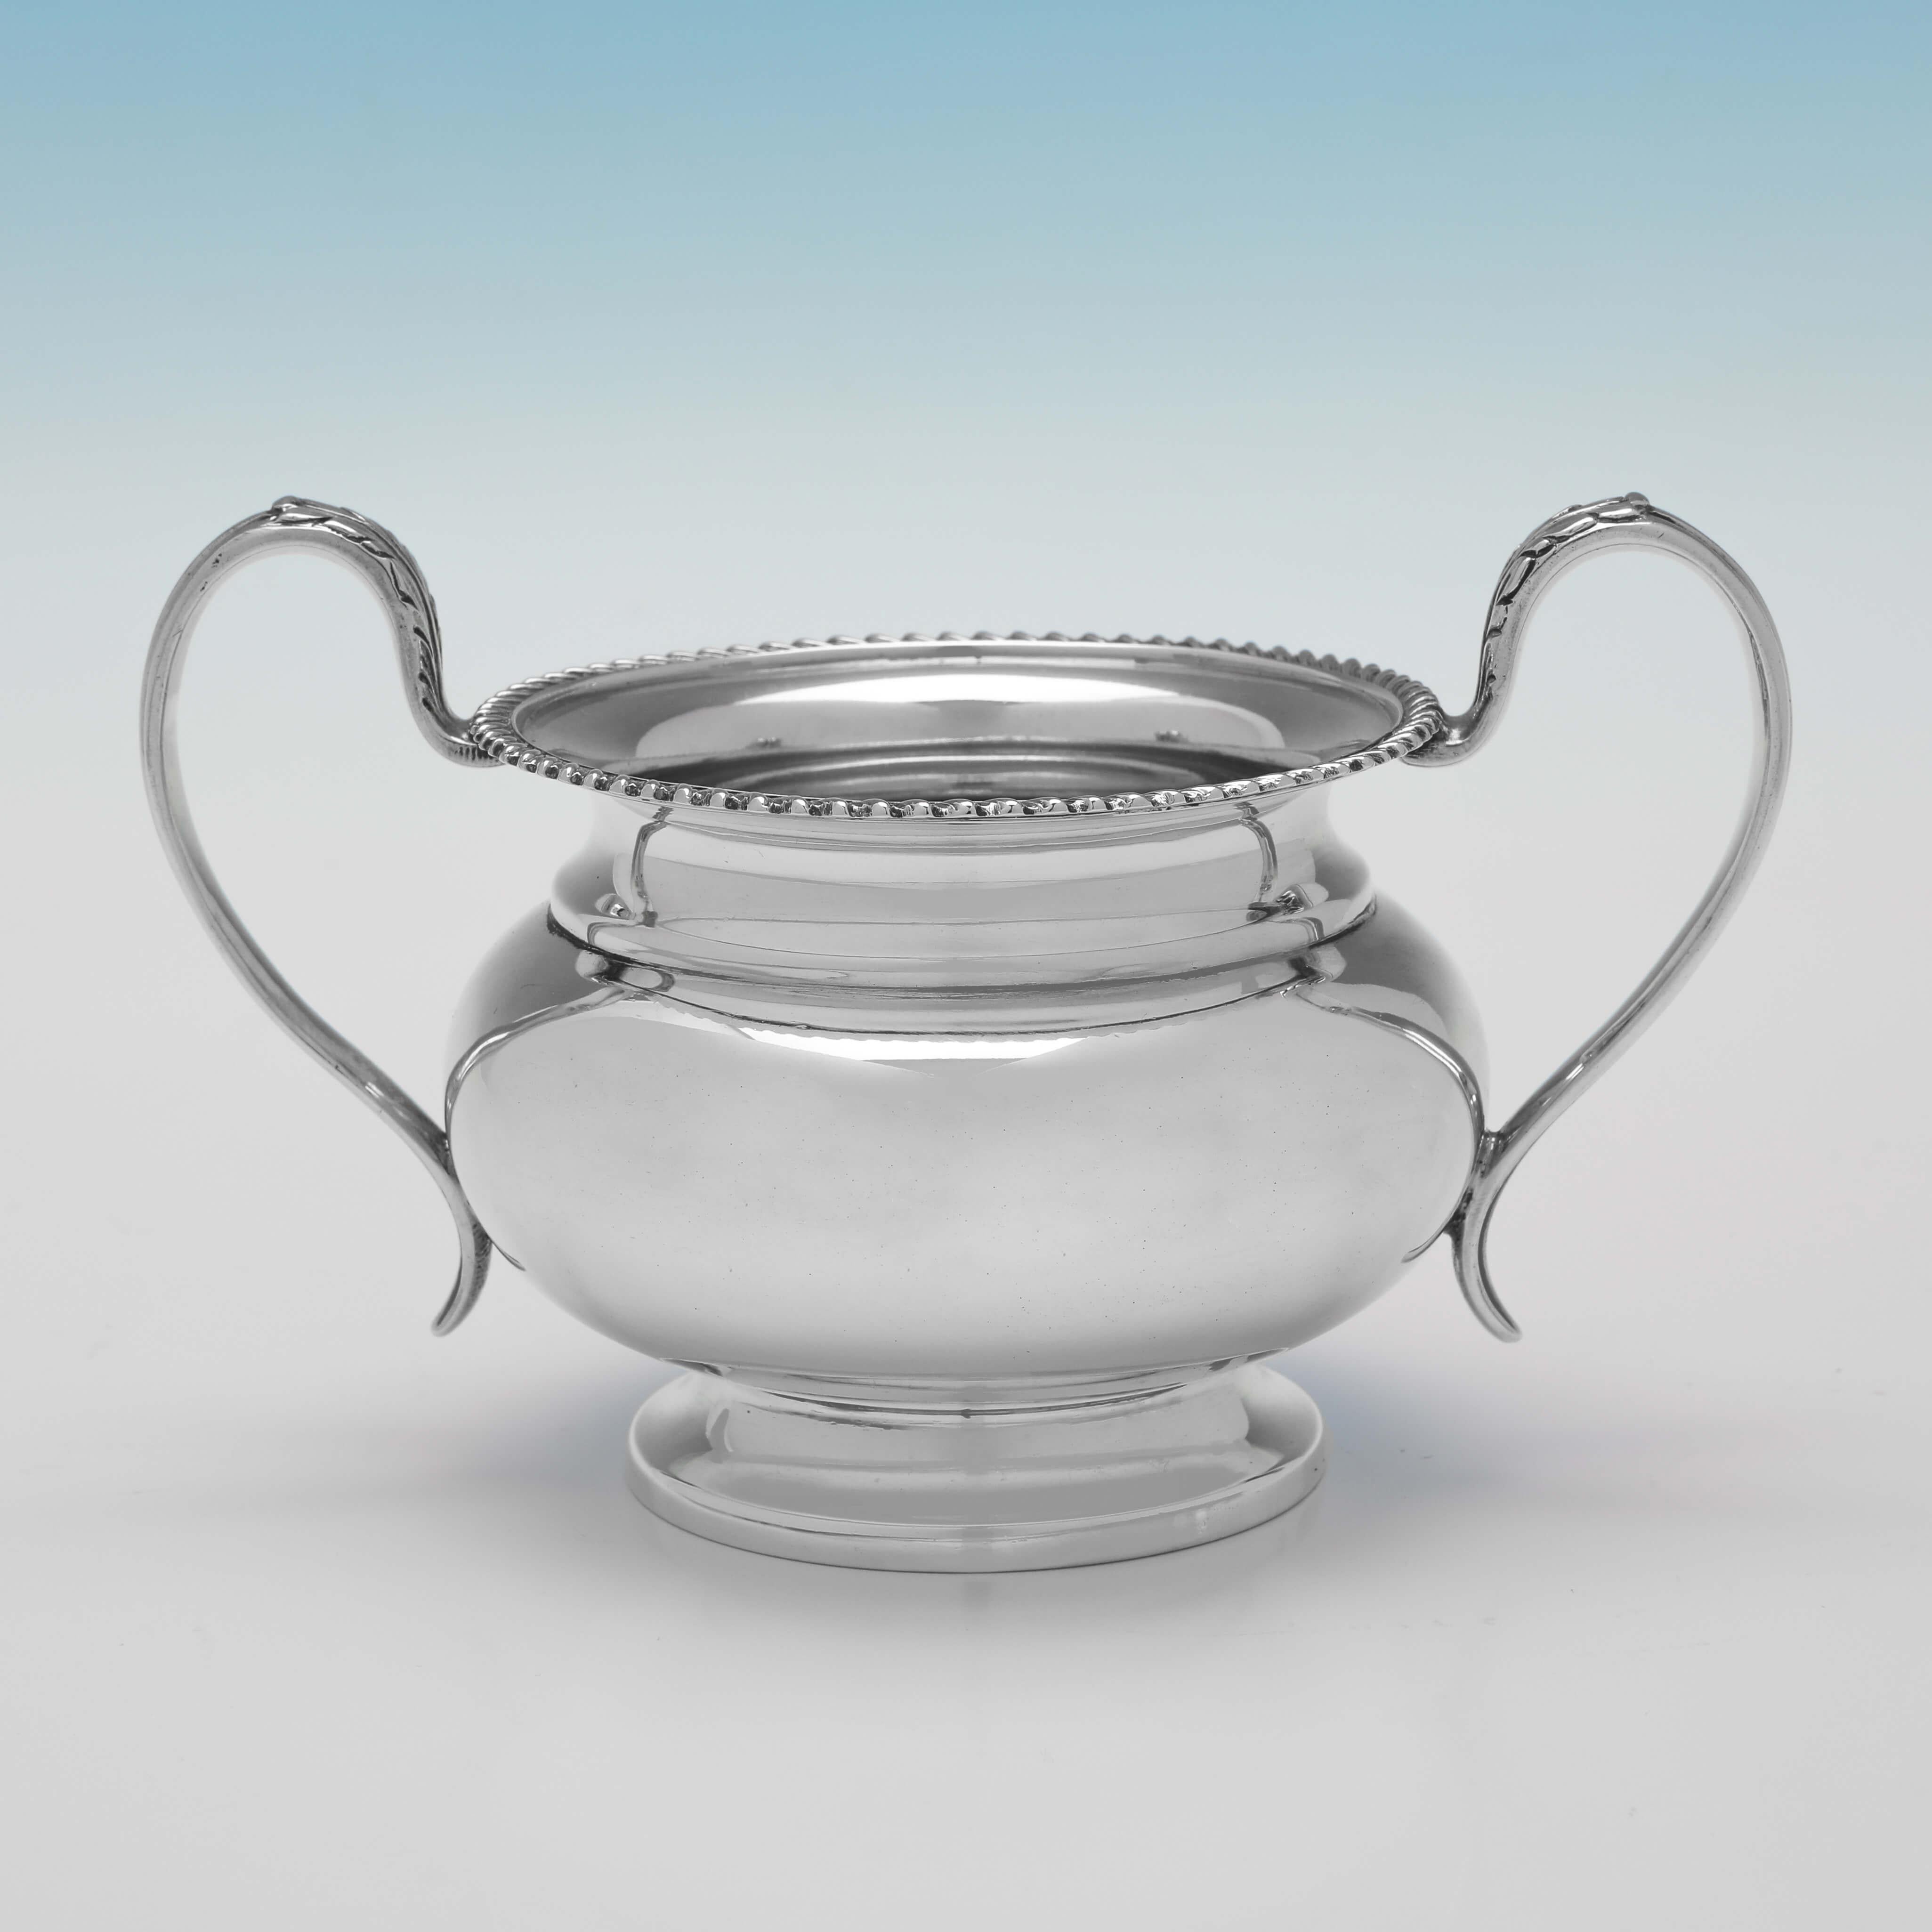 Hallmarked in Sheffield in 1927 by Mappin & Webb, this handsome Sterling Silver Sugar and Cream, are round in shape, and feature gadroon borders. 

The sugar bowl measures 3.75